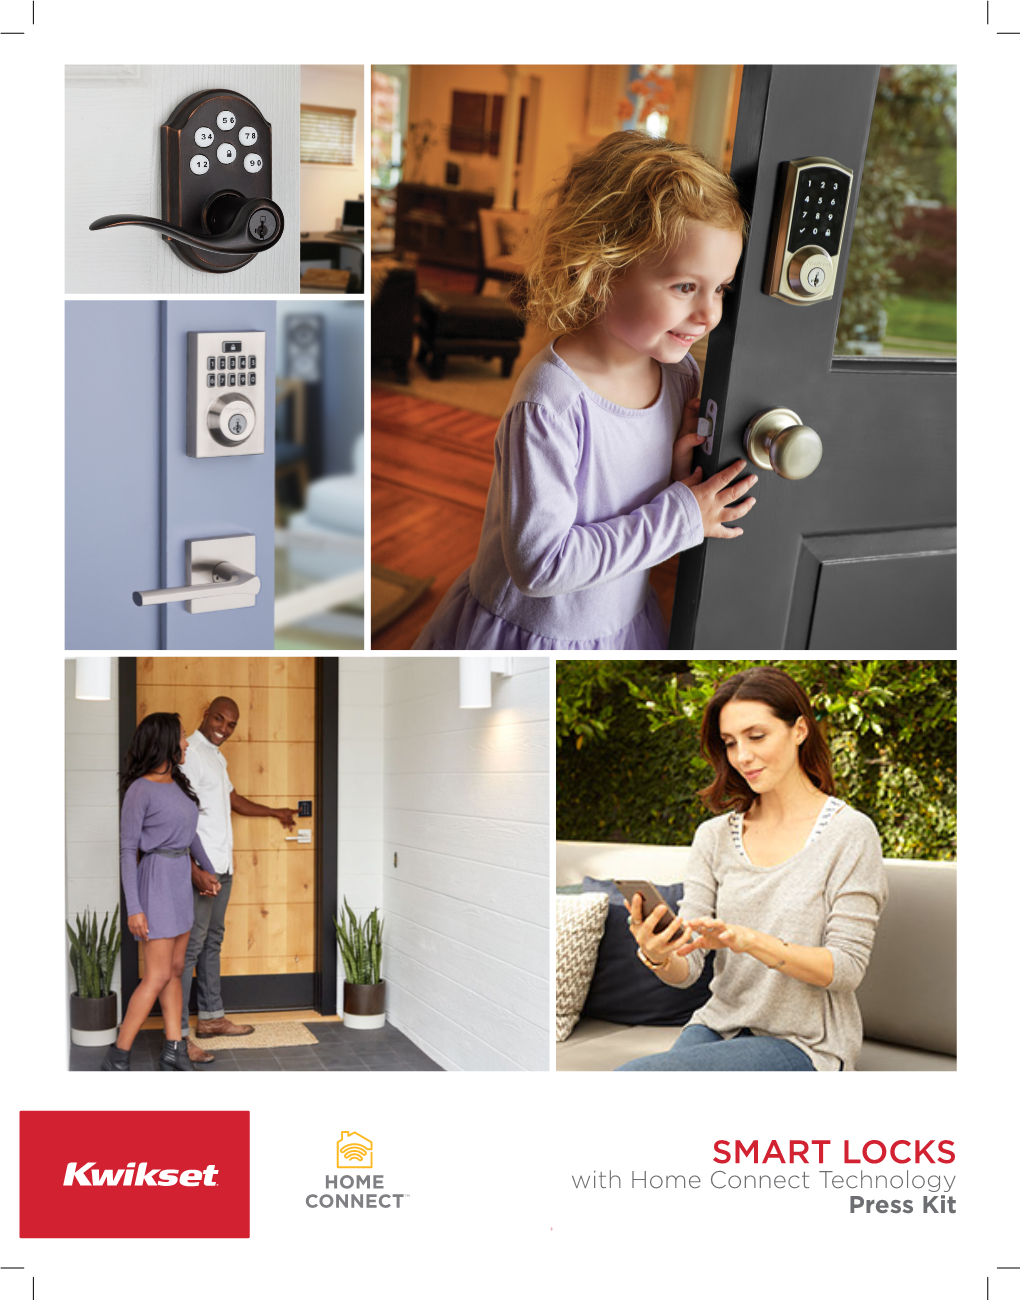 SMART LOCKS with Home Connect Technology Press Kit